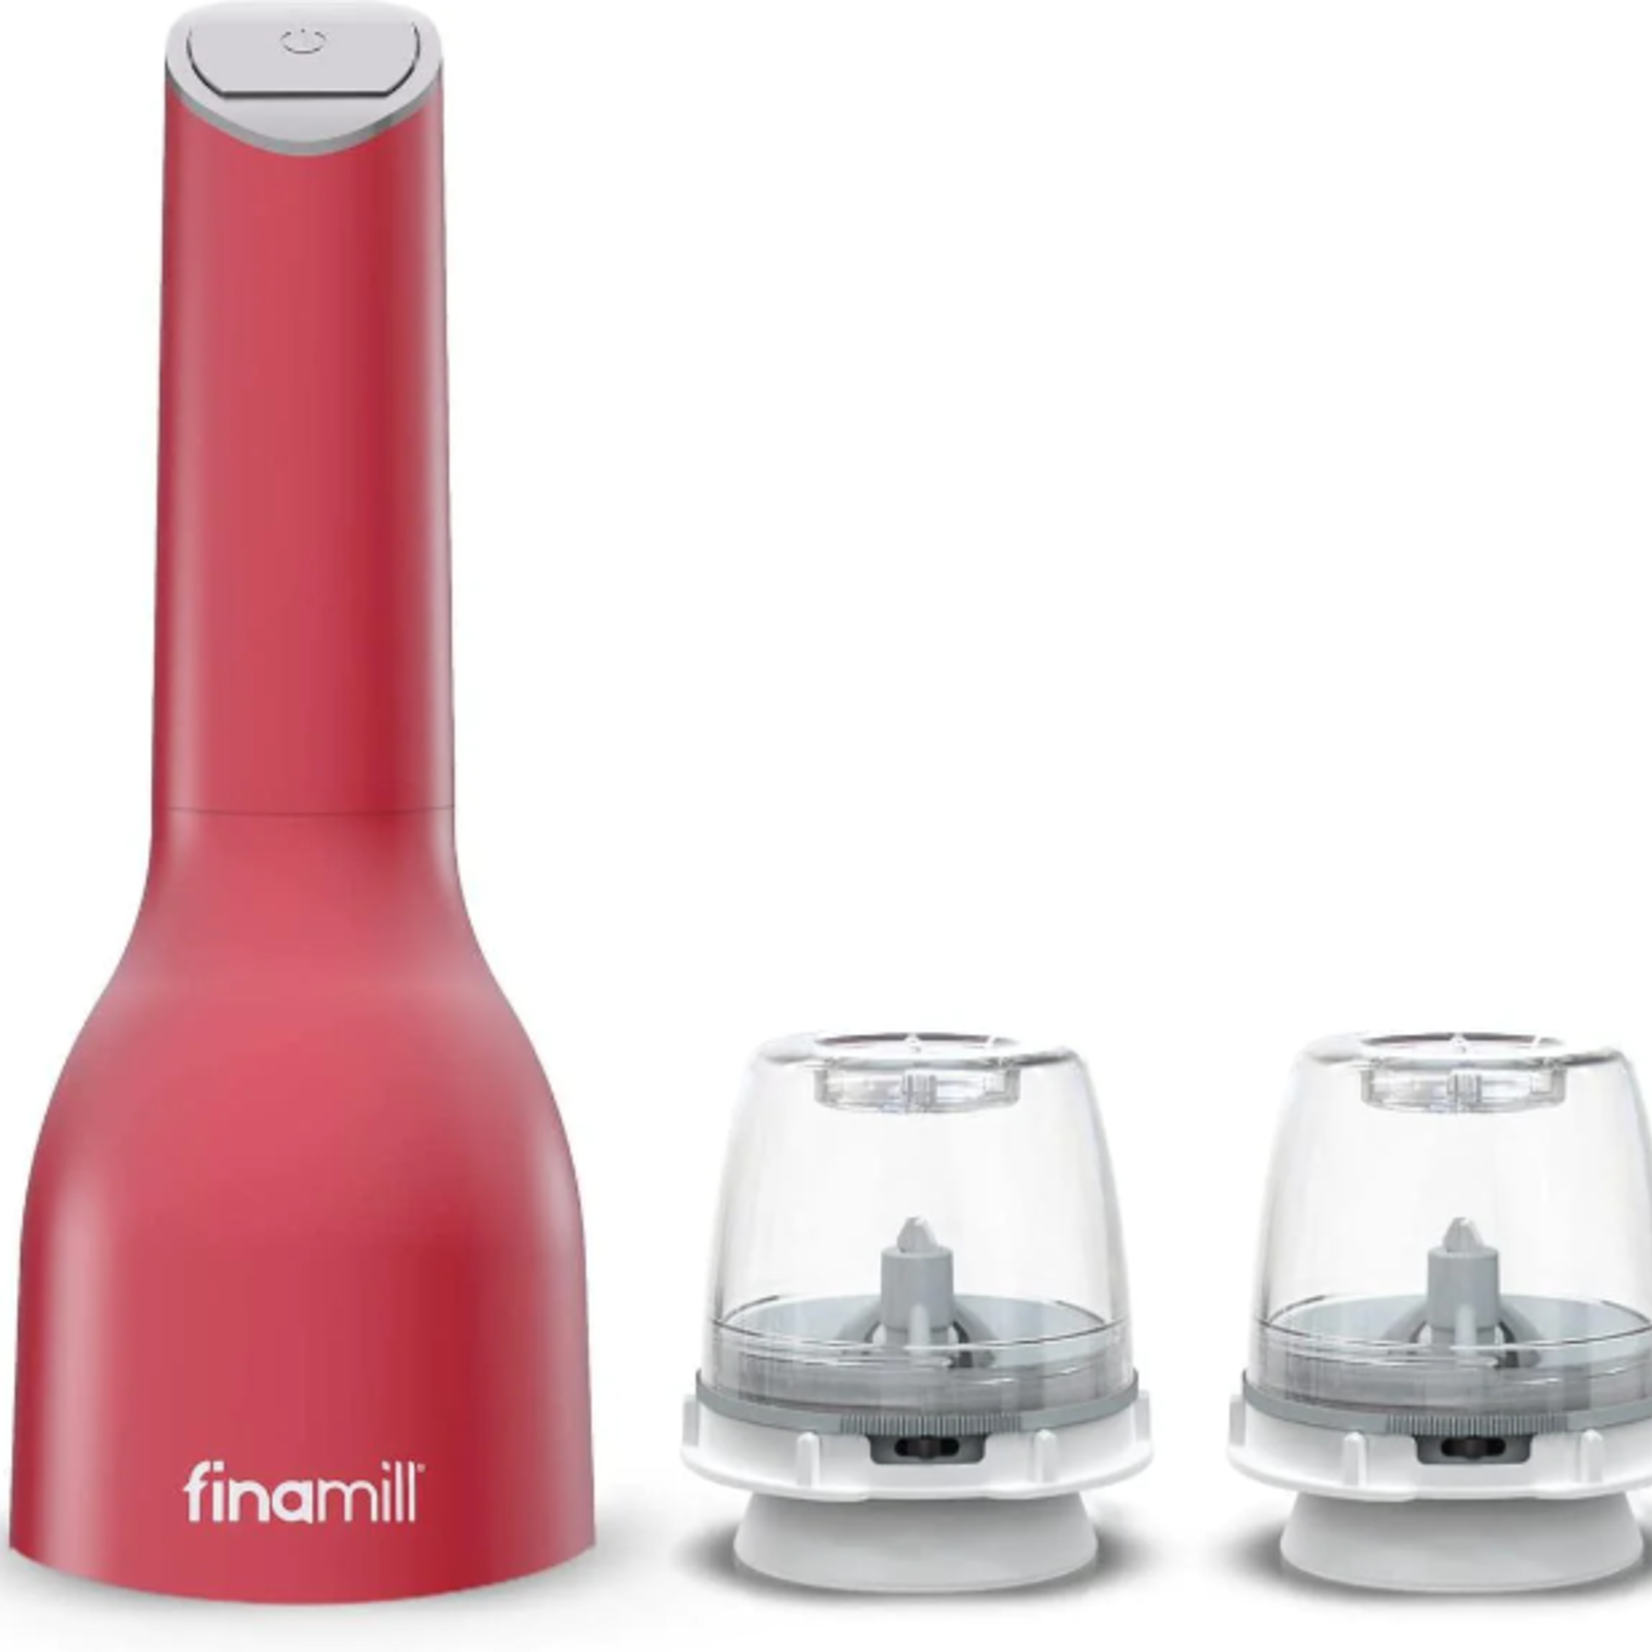 Finamill FinaMill Battery Operated Grinder, Sangria